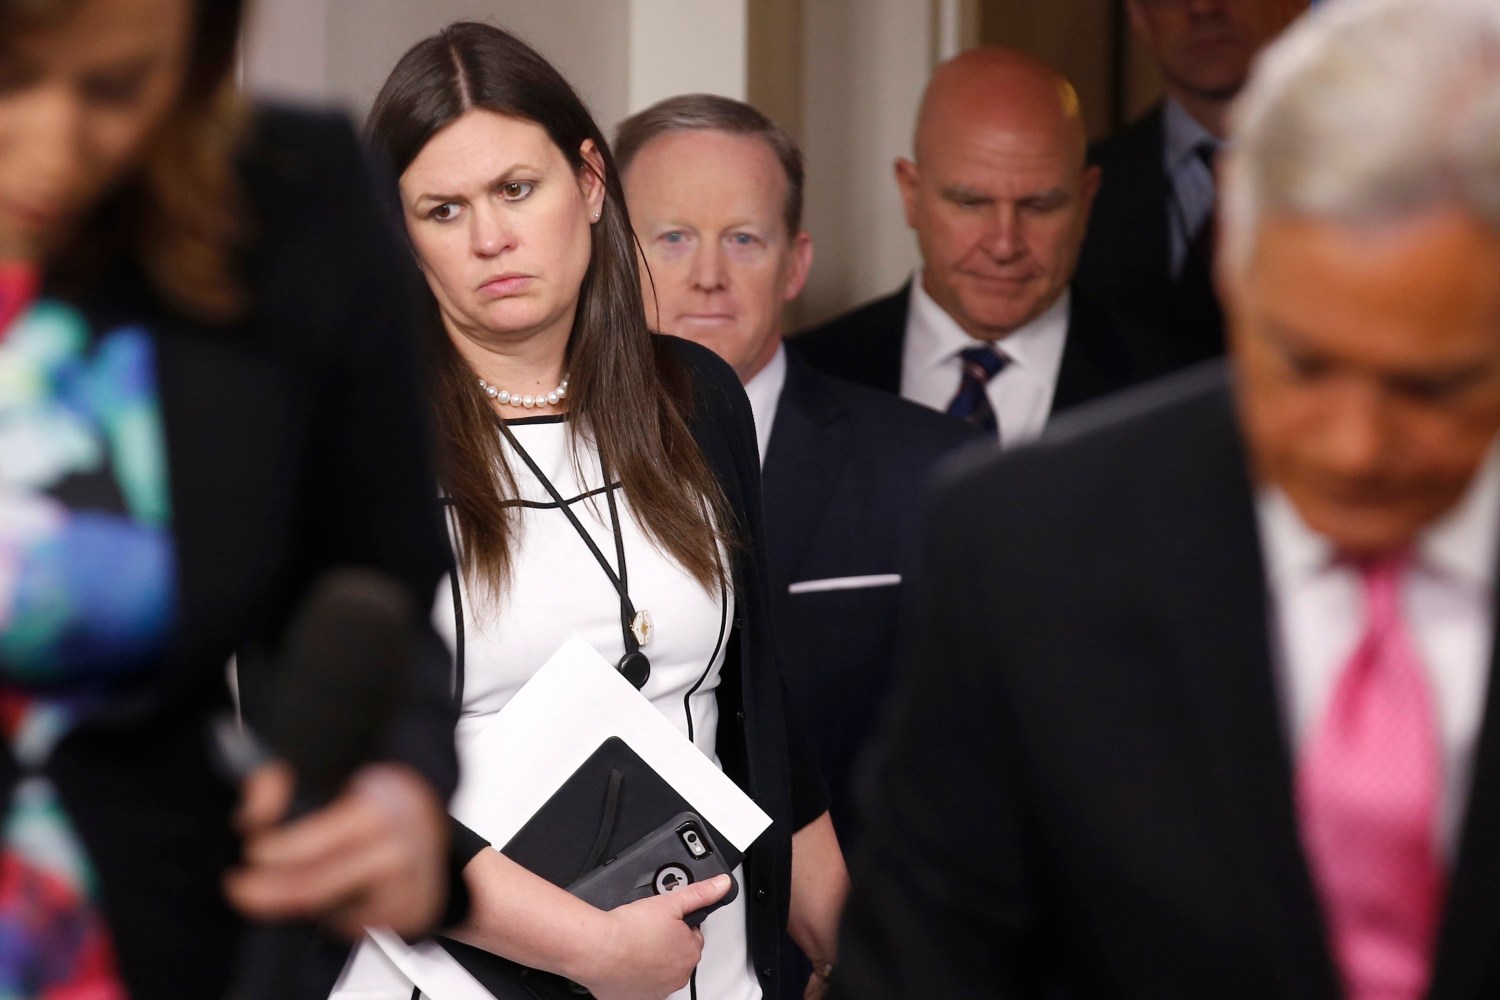 Deputy White House press secretary Sarah Huckabee Sanders (L-R) holds the door for Press Secretary Sean Spicer and White House national security advisor H.R. McMaster to speak in the White House briefing room in Washington, U.S., May 16, 2017. REUTERS/Joshua Roberts - RTX3638W